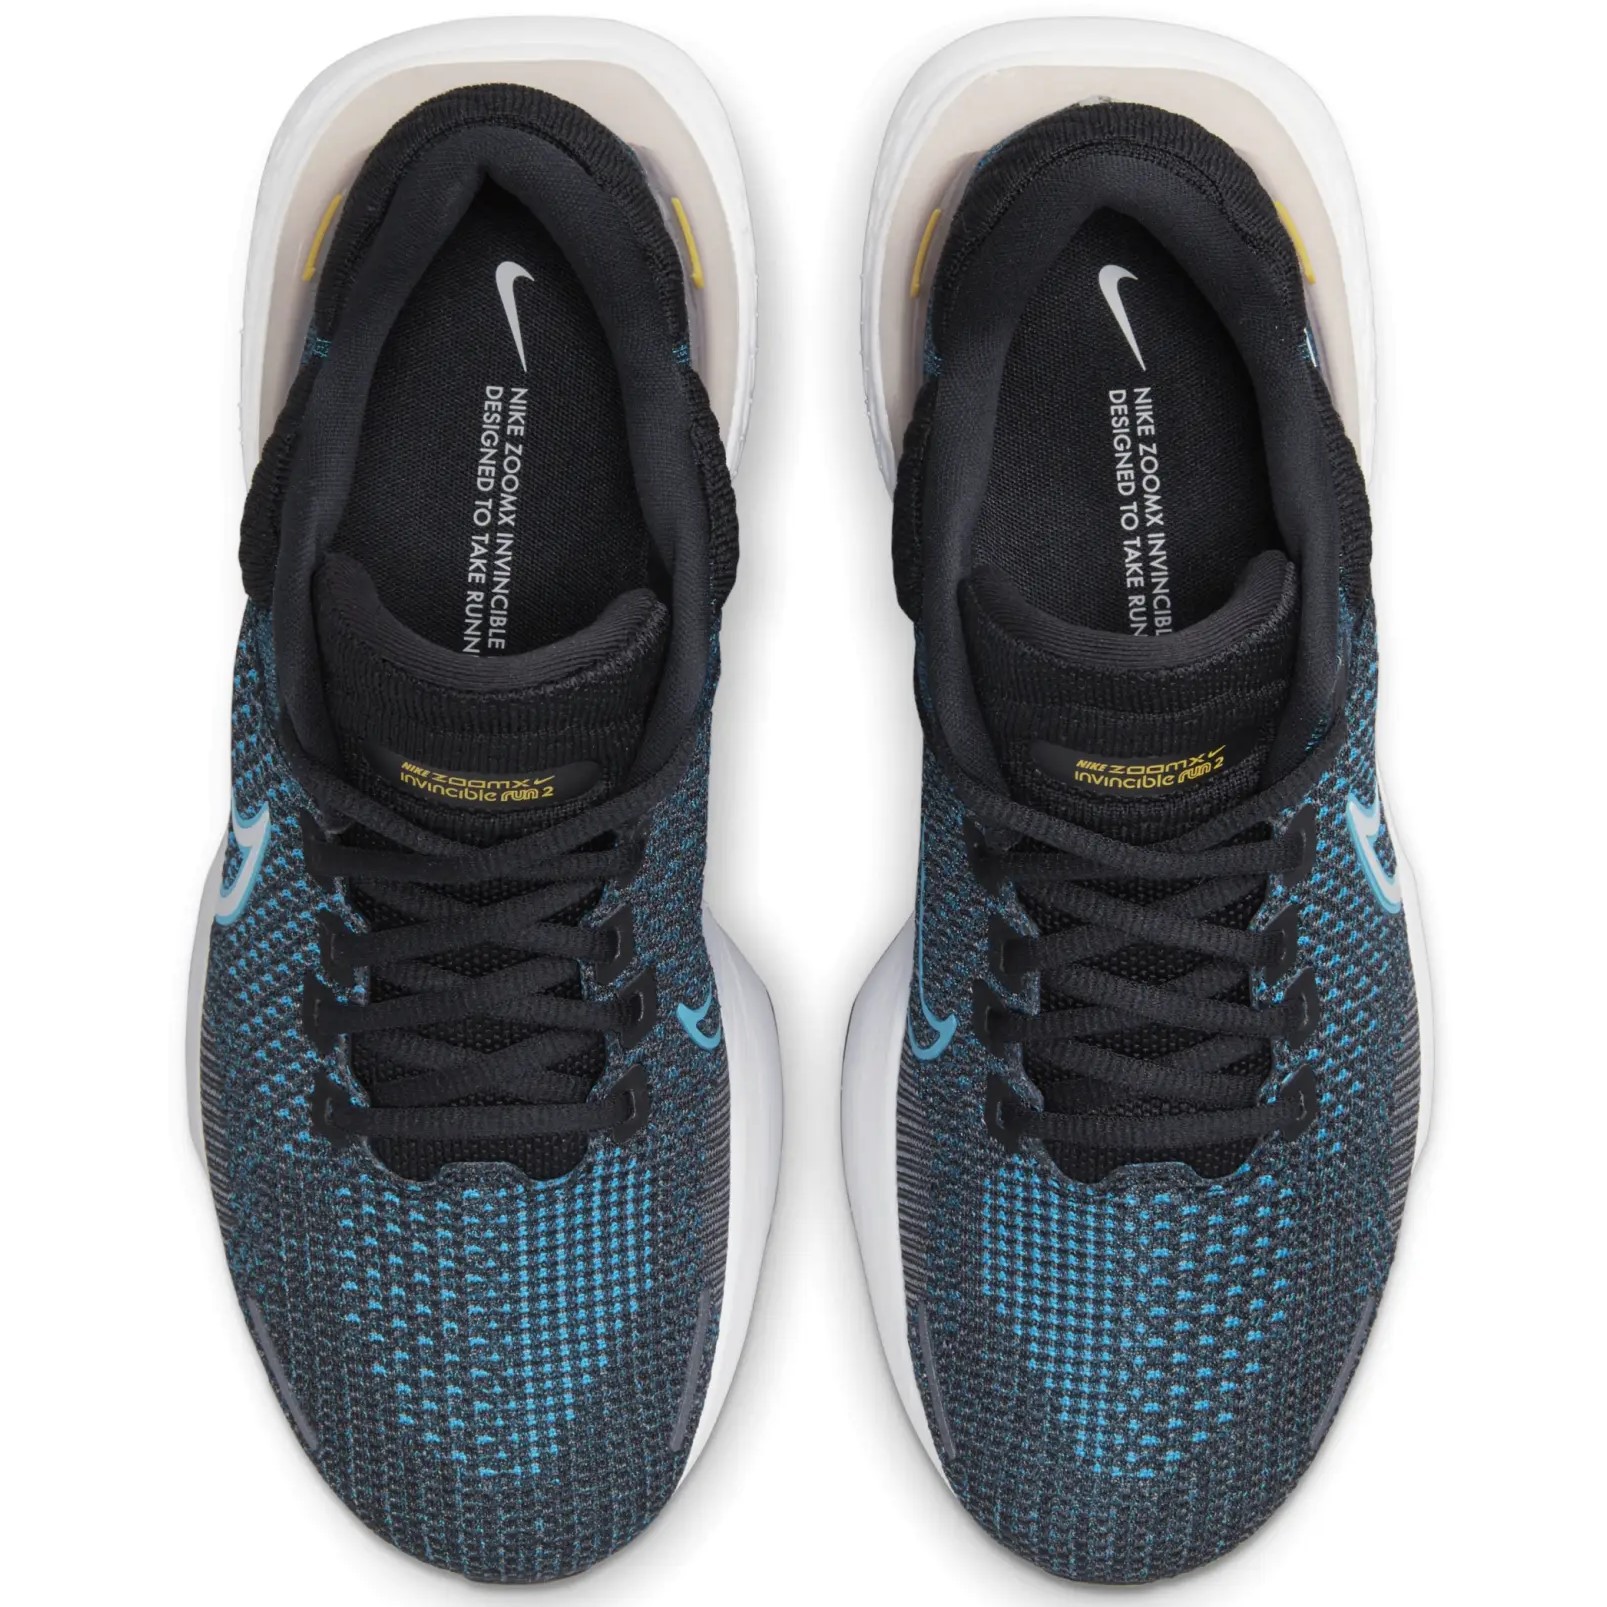 GIÀY THỂ THAO NIKE NAM ZOOMX INVINCIBLE RUN FLYKNIT 2 BLACK CHLORINE BLUE WHITE DH5425-003 11